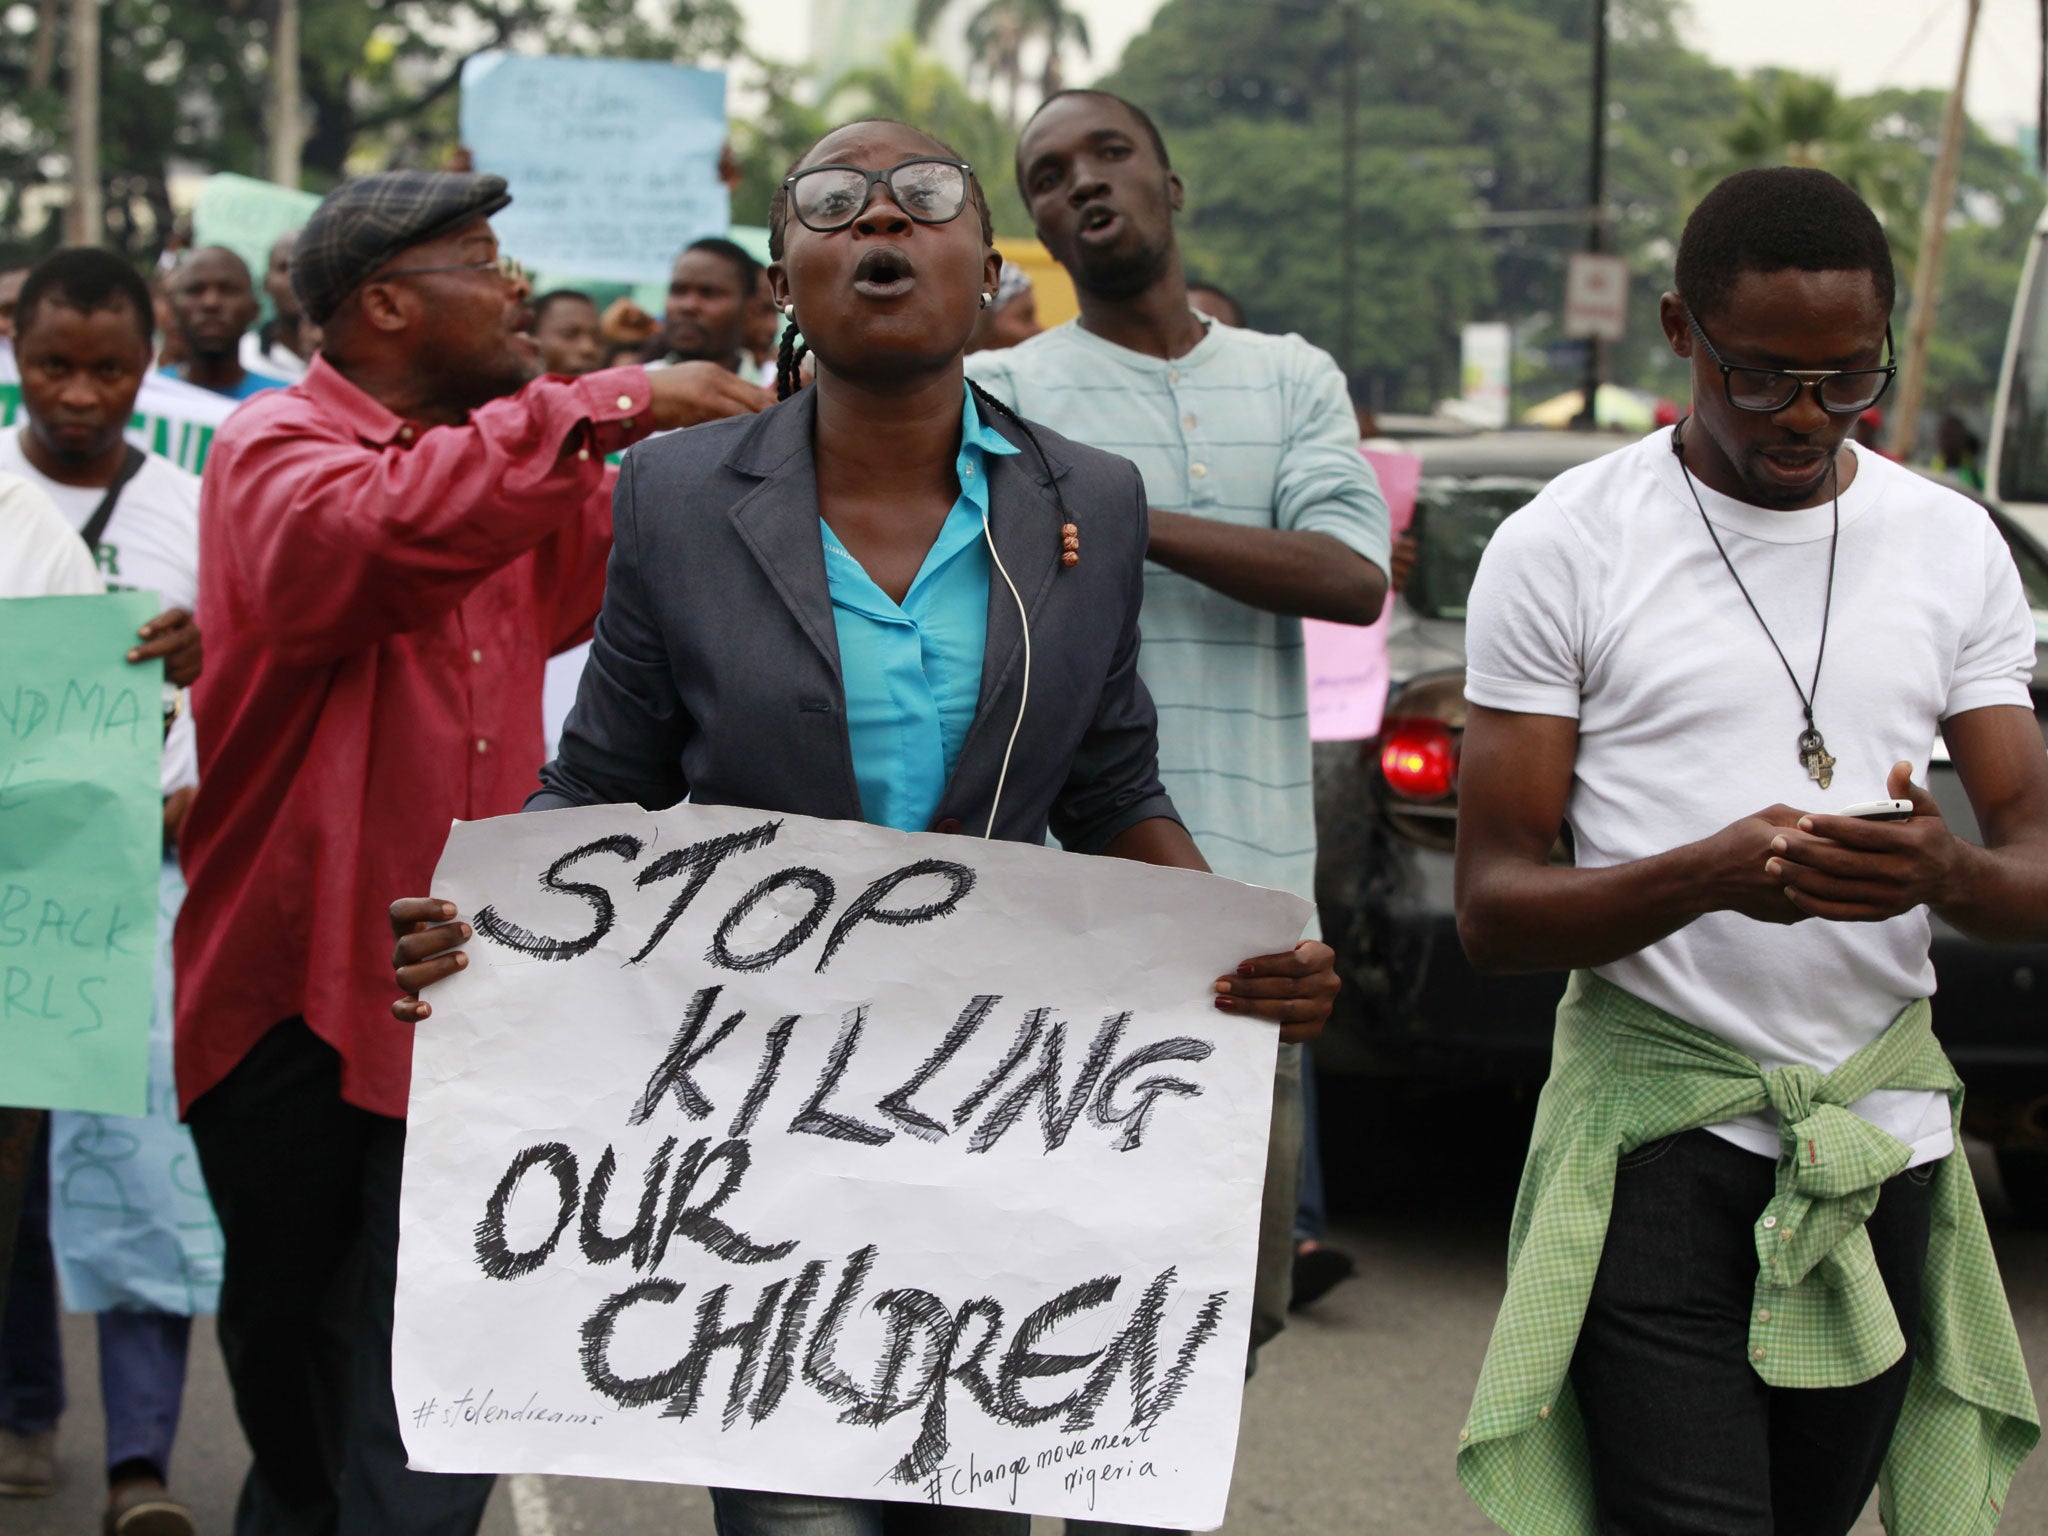 Demonstrators in Lagos call on the government to rescue the schoolgirls abducted by militants